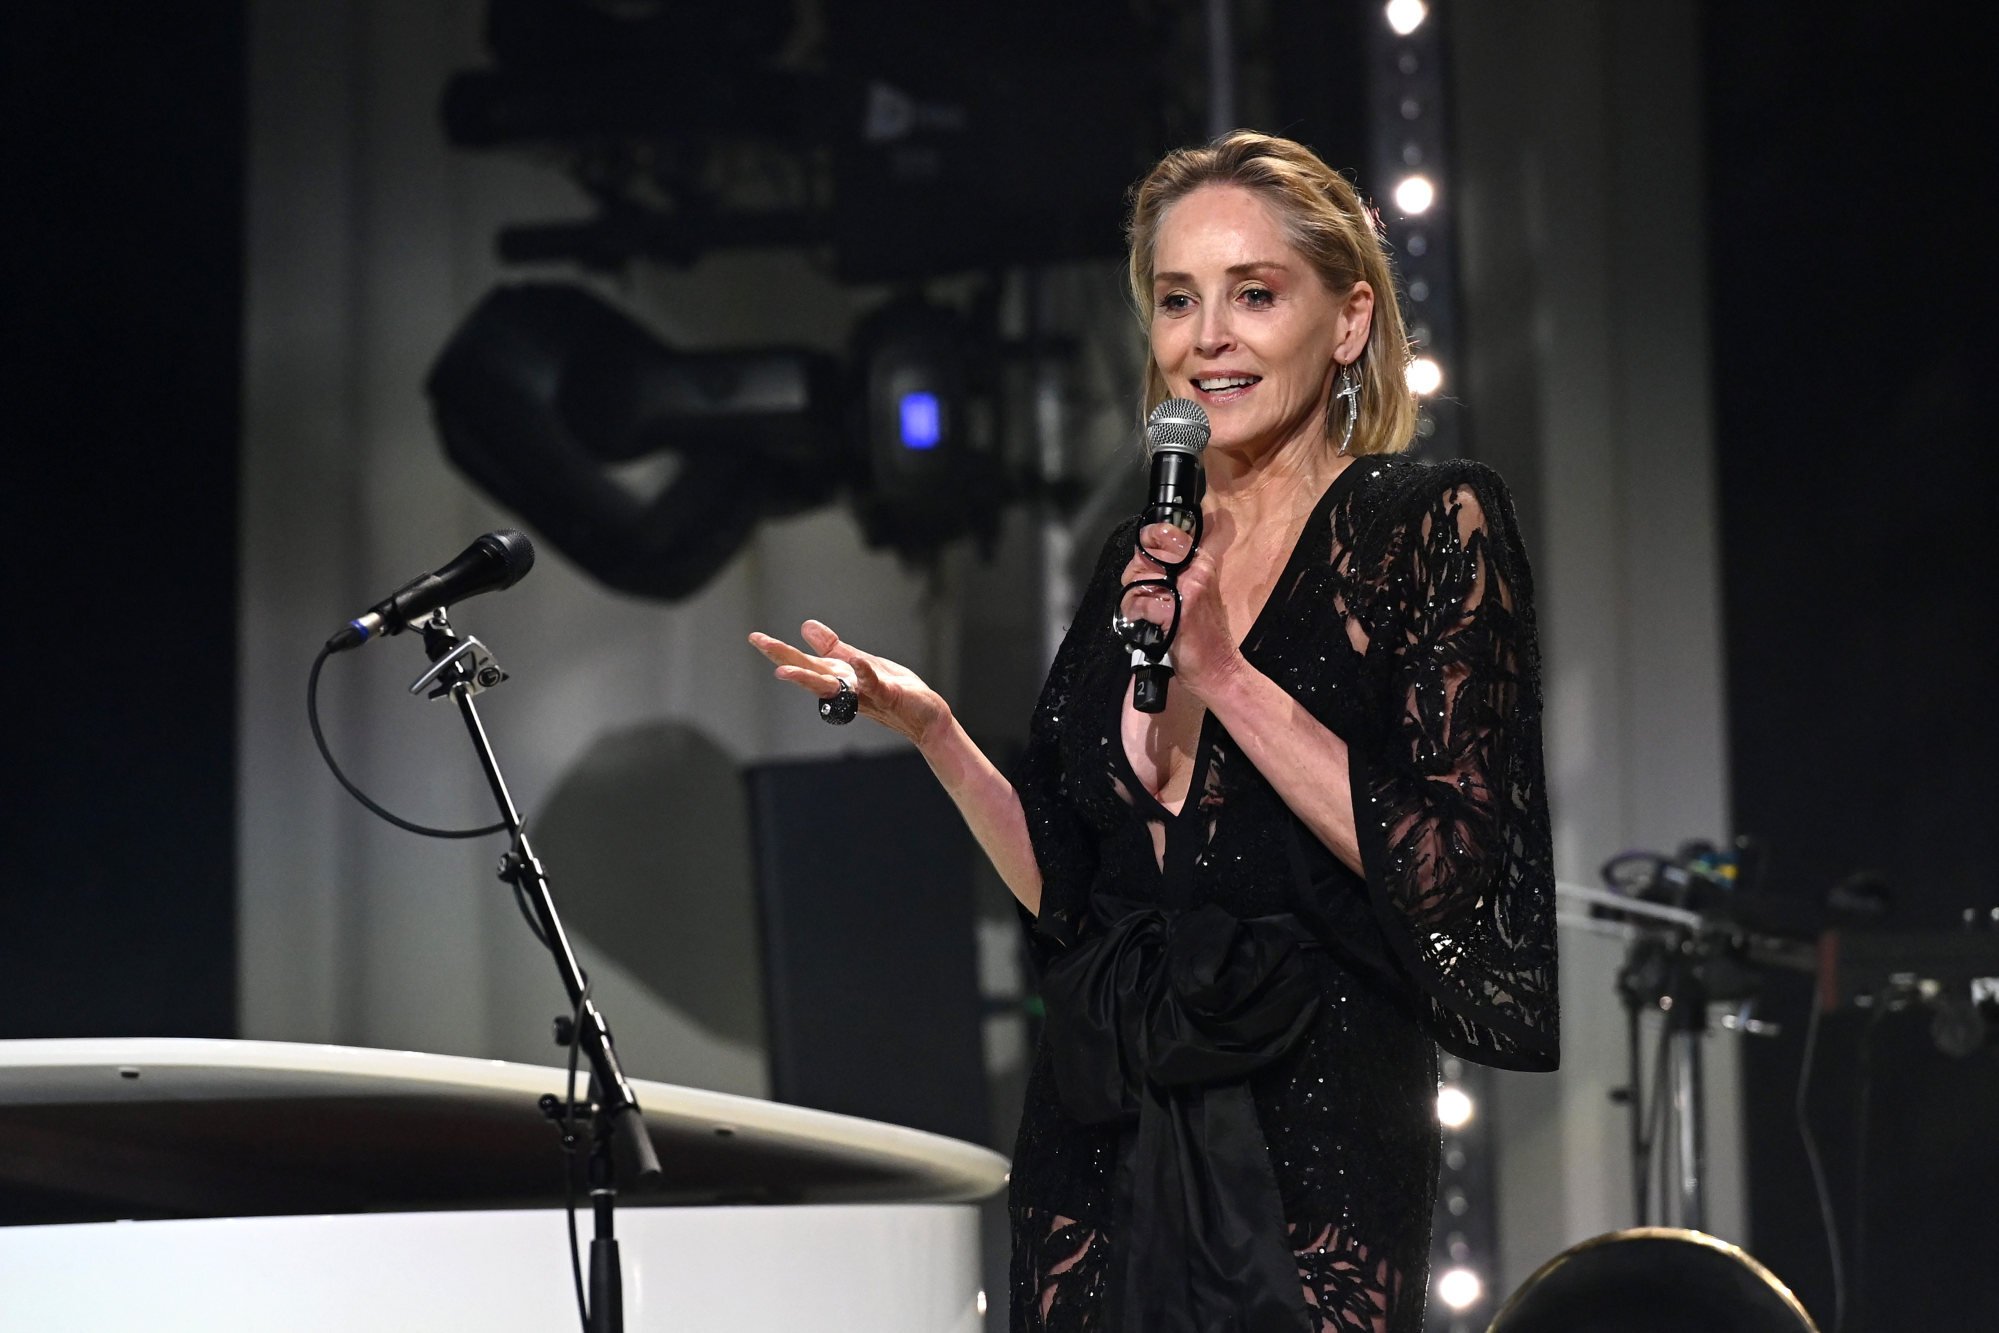 Sharon Stone speaks onstage at the 28th Annual Elton John Aids Foundation Academy Awards viewing party in February 2020, in West Hollywood, California. Photo: Getty Images